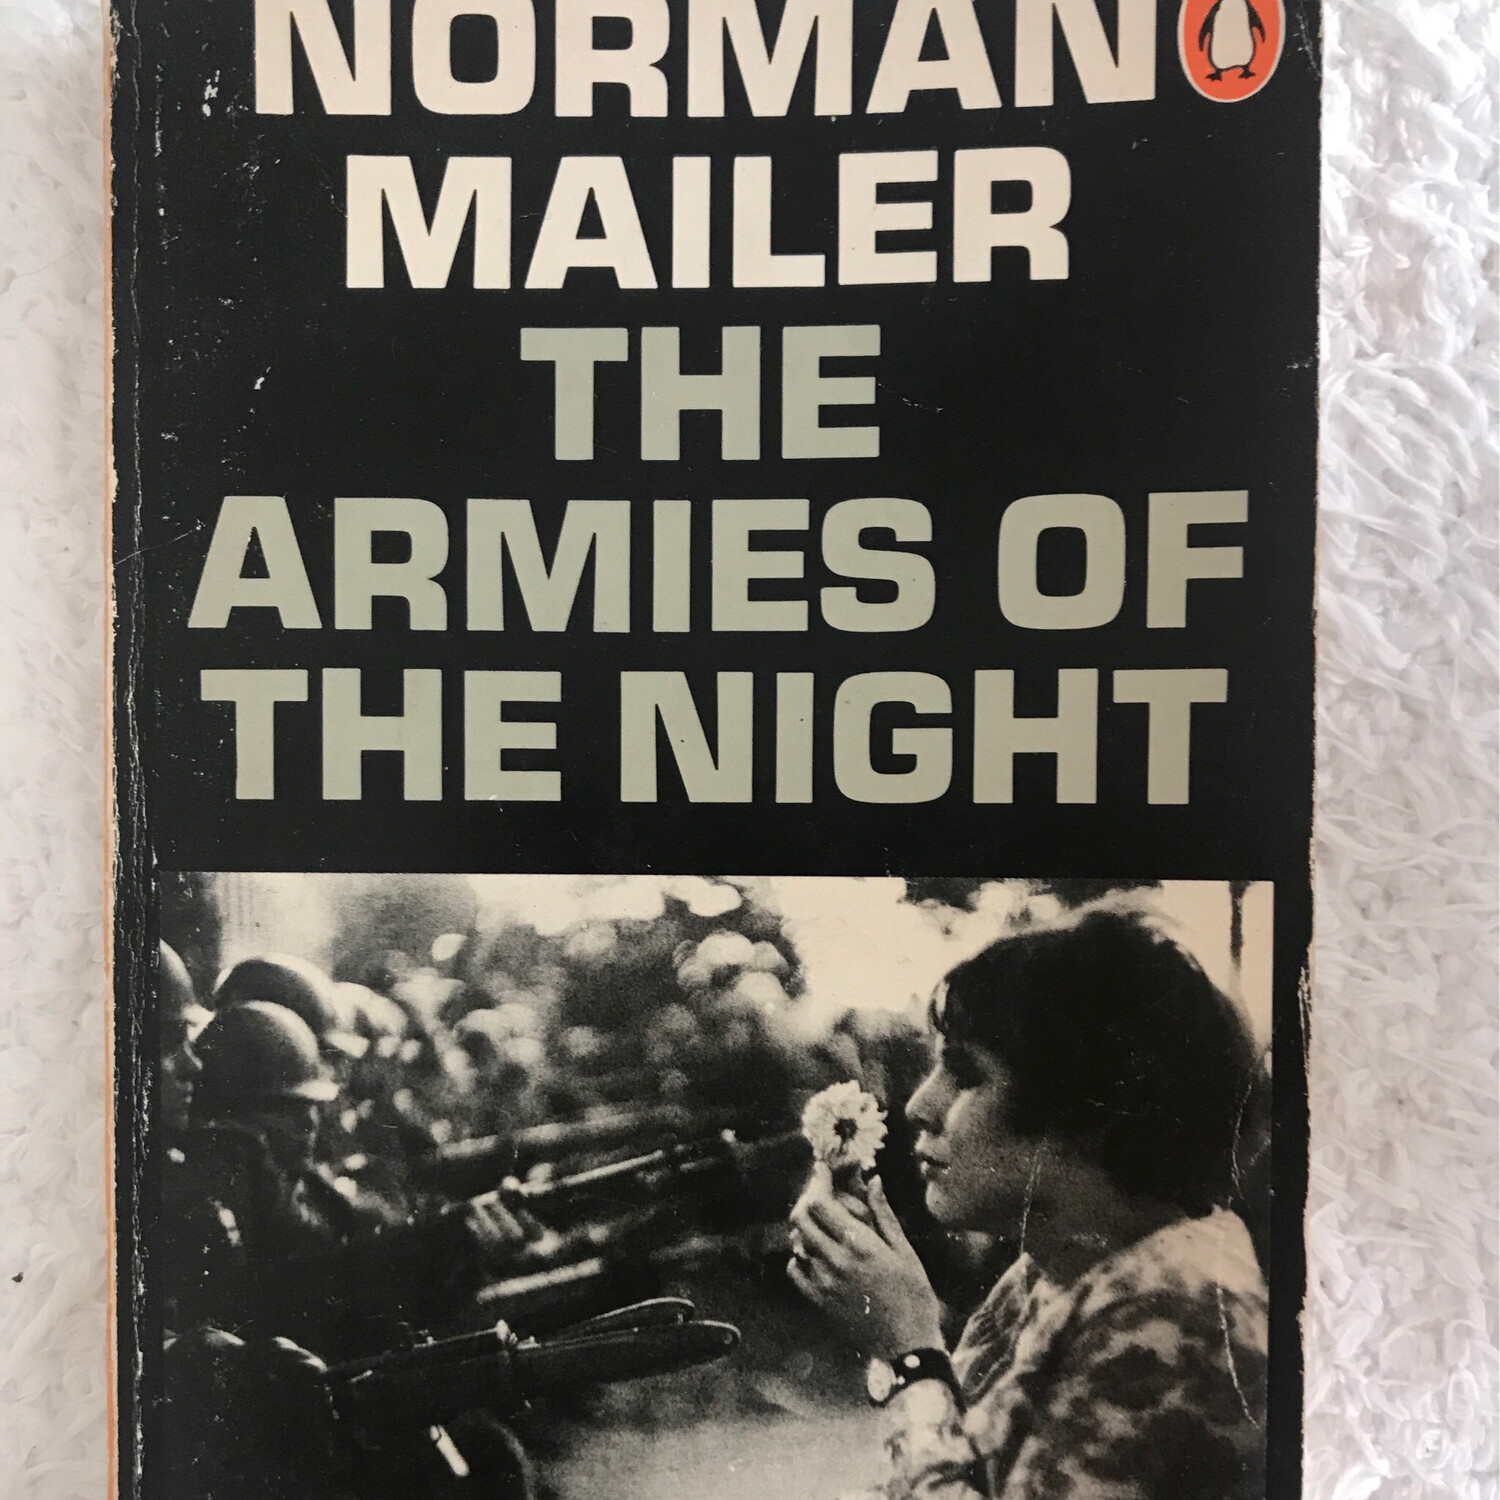 The Armies Of The Night, Norman Mailer